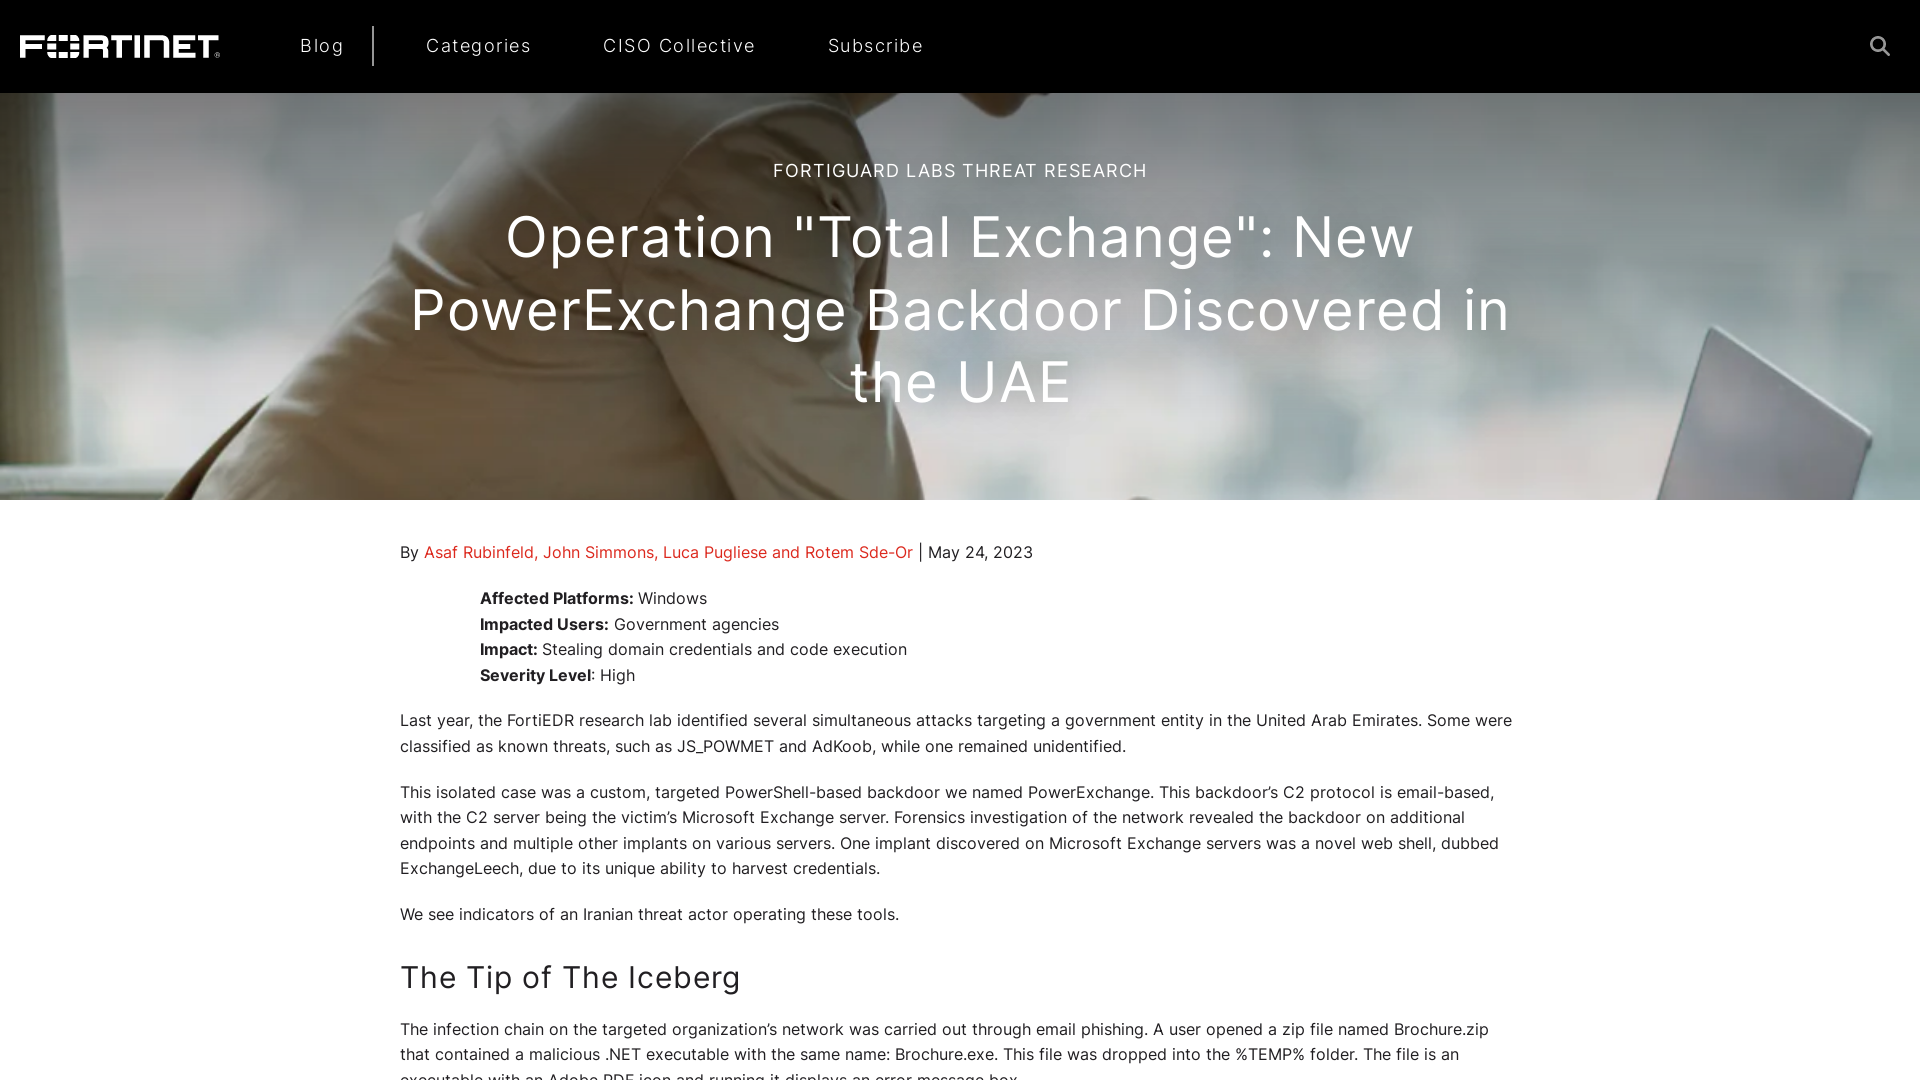 Operation "Total Exchange": New PowerExchange Backdoor Discovered in the UAE | FortiGuard Labs